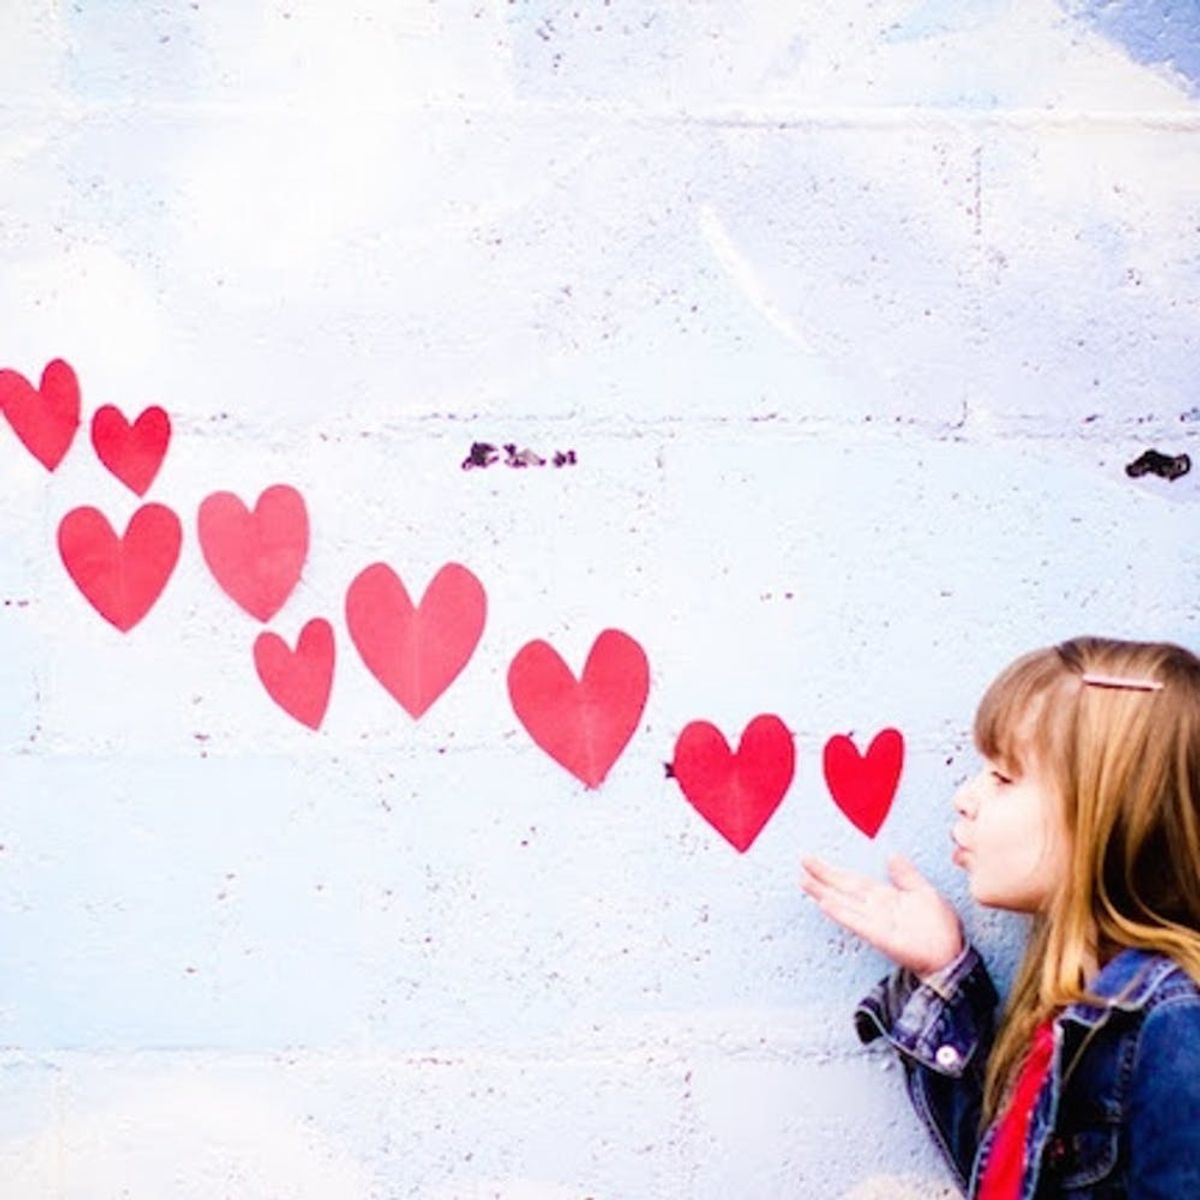 14 Adorable Kid Photo Shoot Ideas for Valentine’s Day